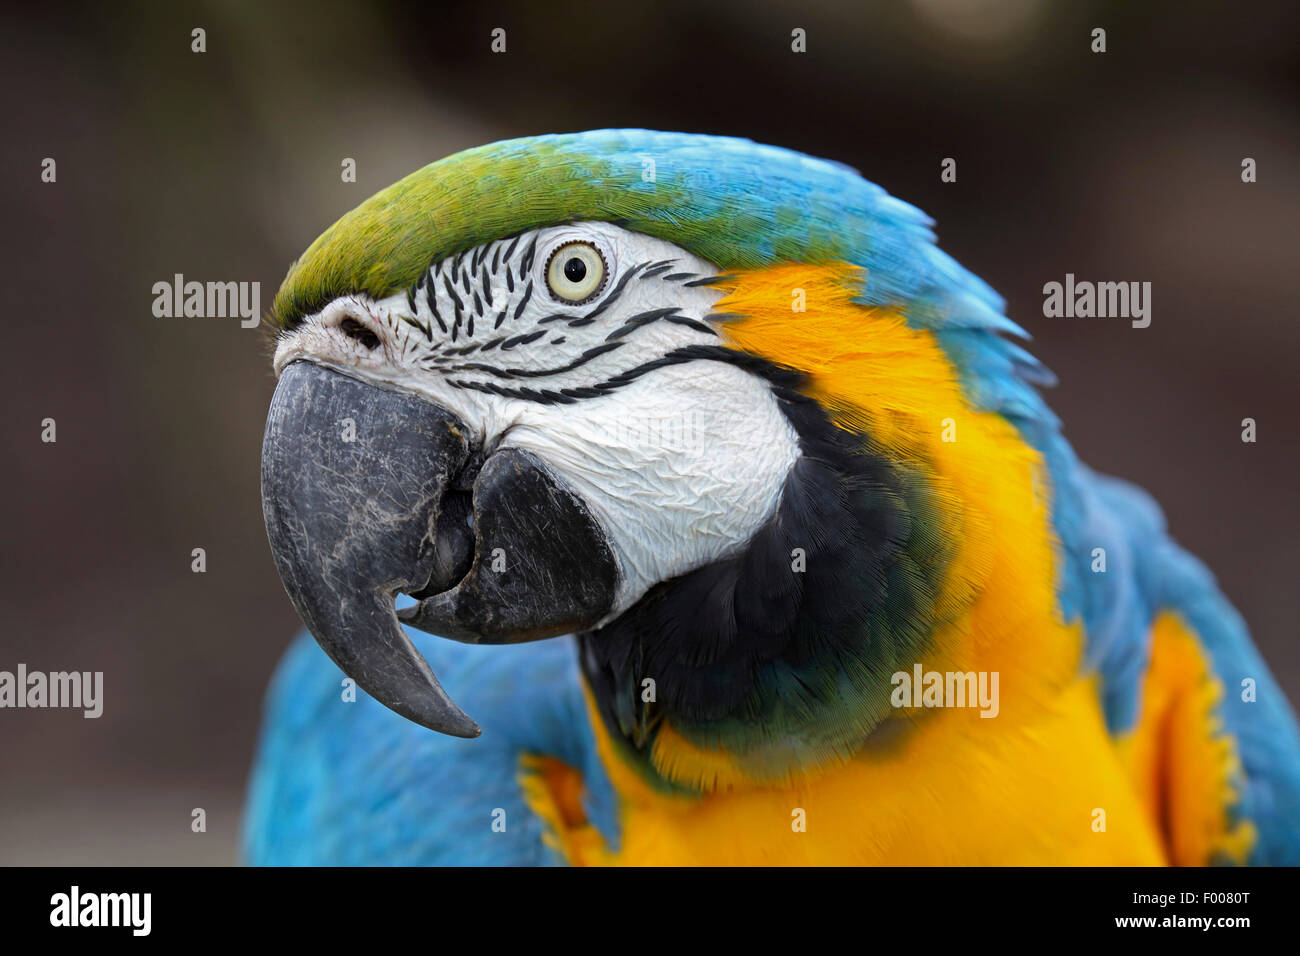 Blue and yellow macaw, Blue and gold Macaw, Blue-and-gold Macaw, Blue-and-yellow Macaw (Ara ararauna), portrait Stock Photo